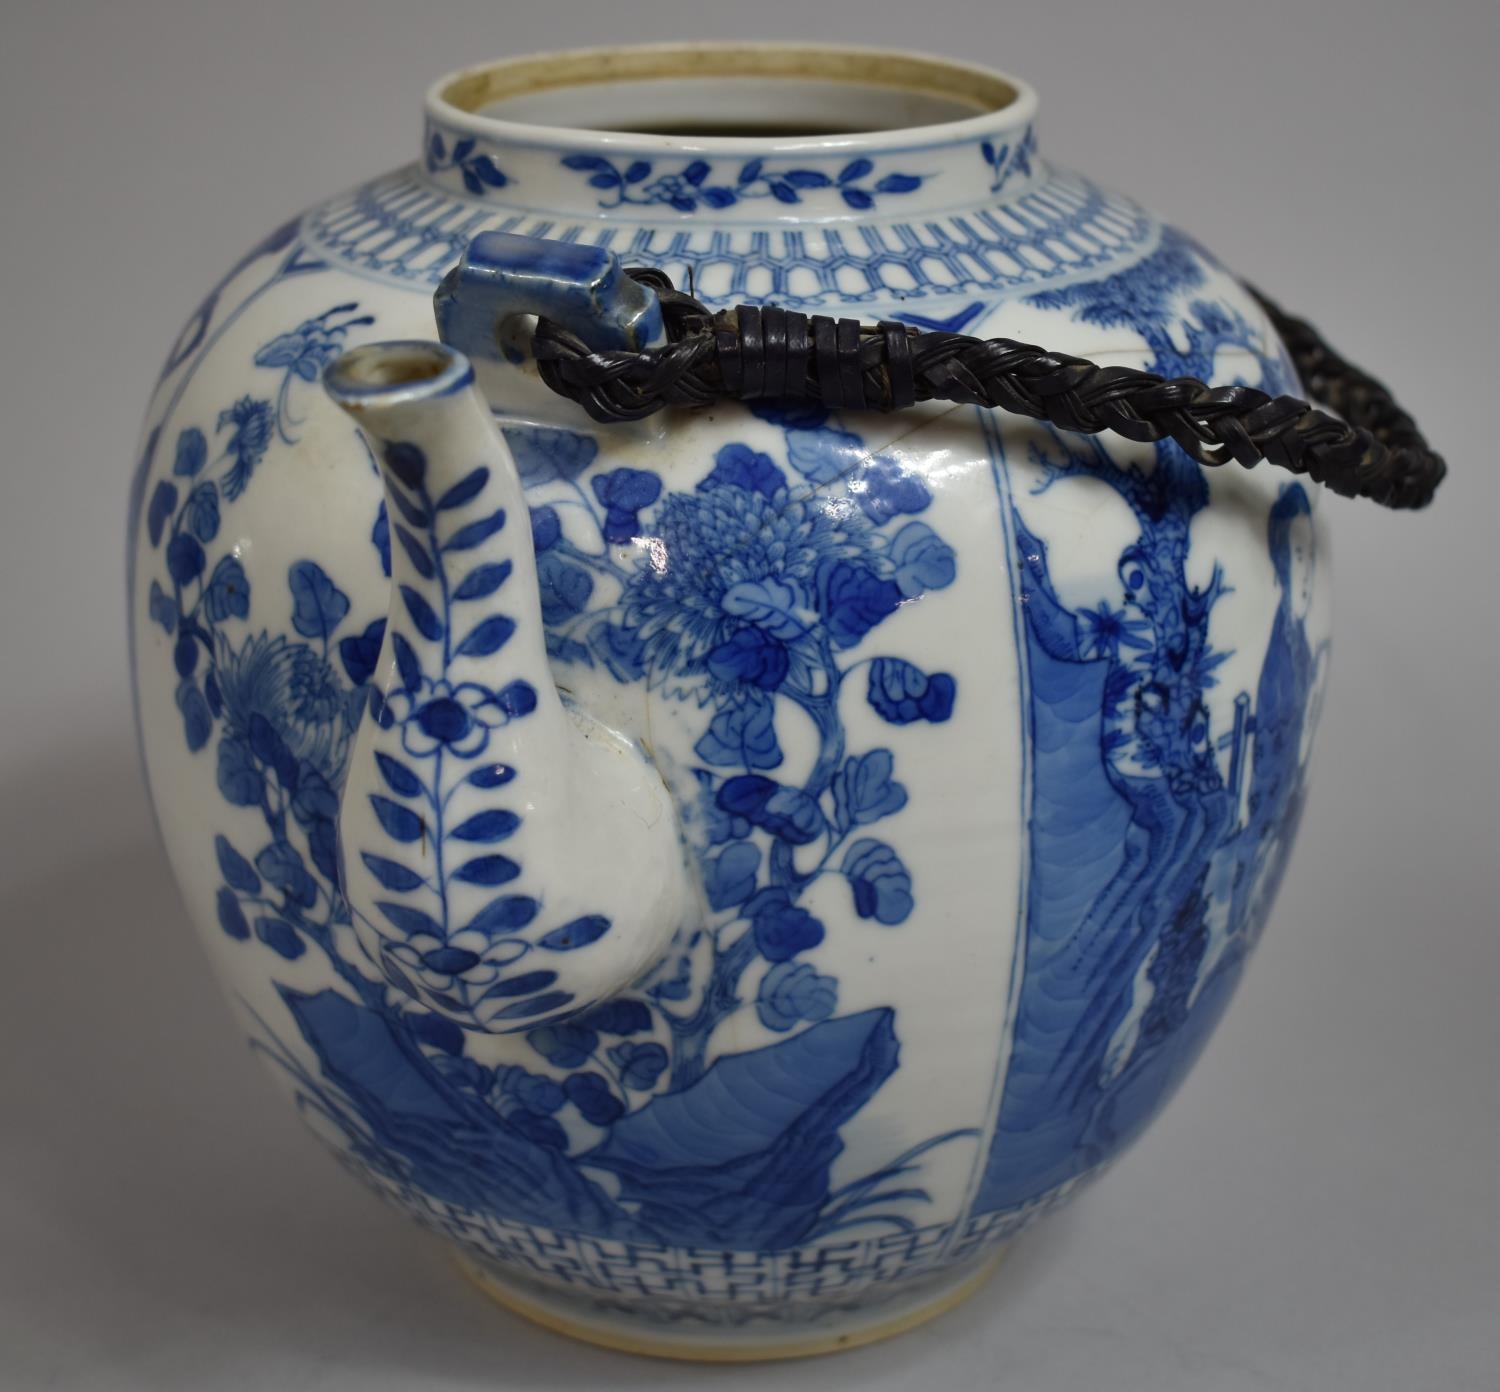 A Large 18th/19th Century Chinese Export Porcelain Teapot of Bellied Form Decorated with Family - Image 4 of 5